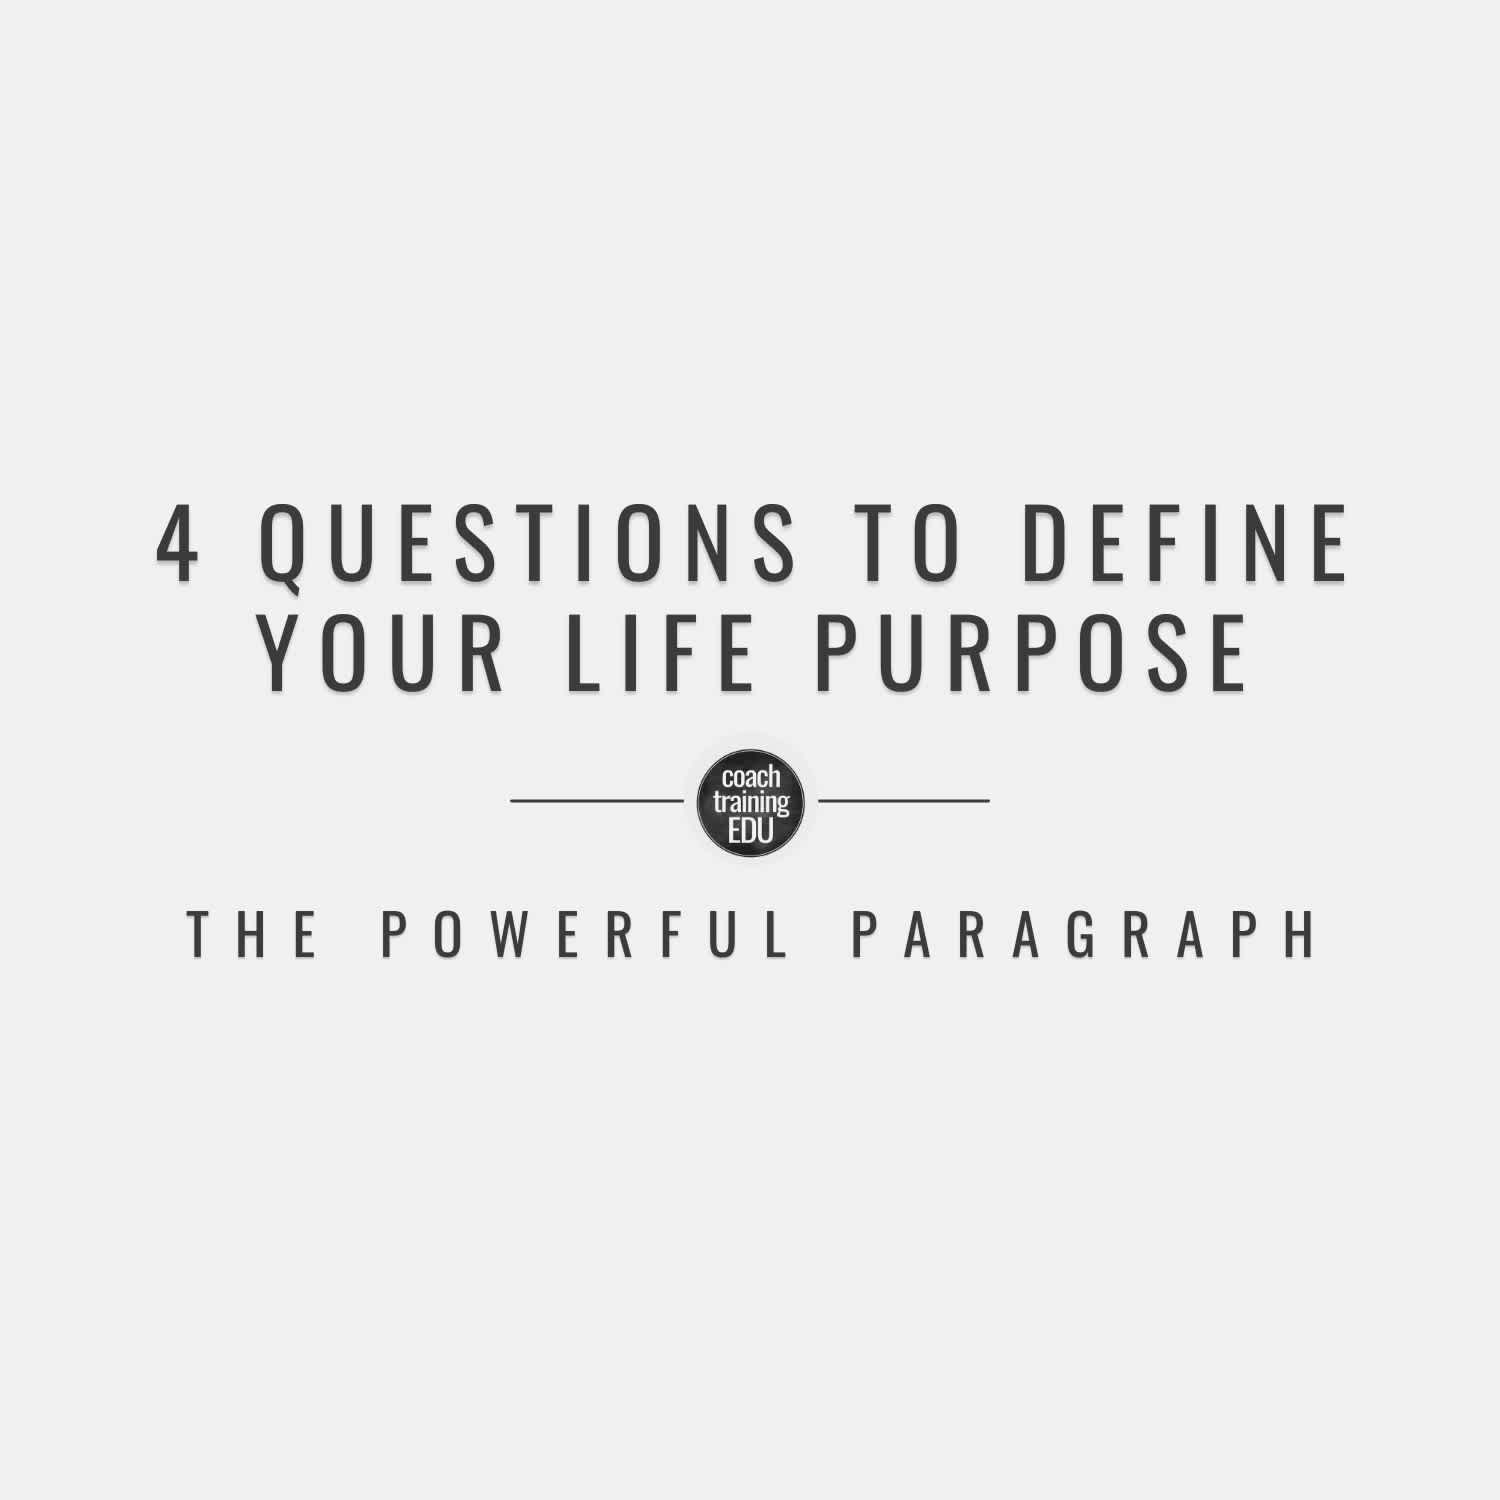 4 Questions to Define Your Life Purpose